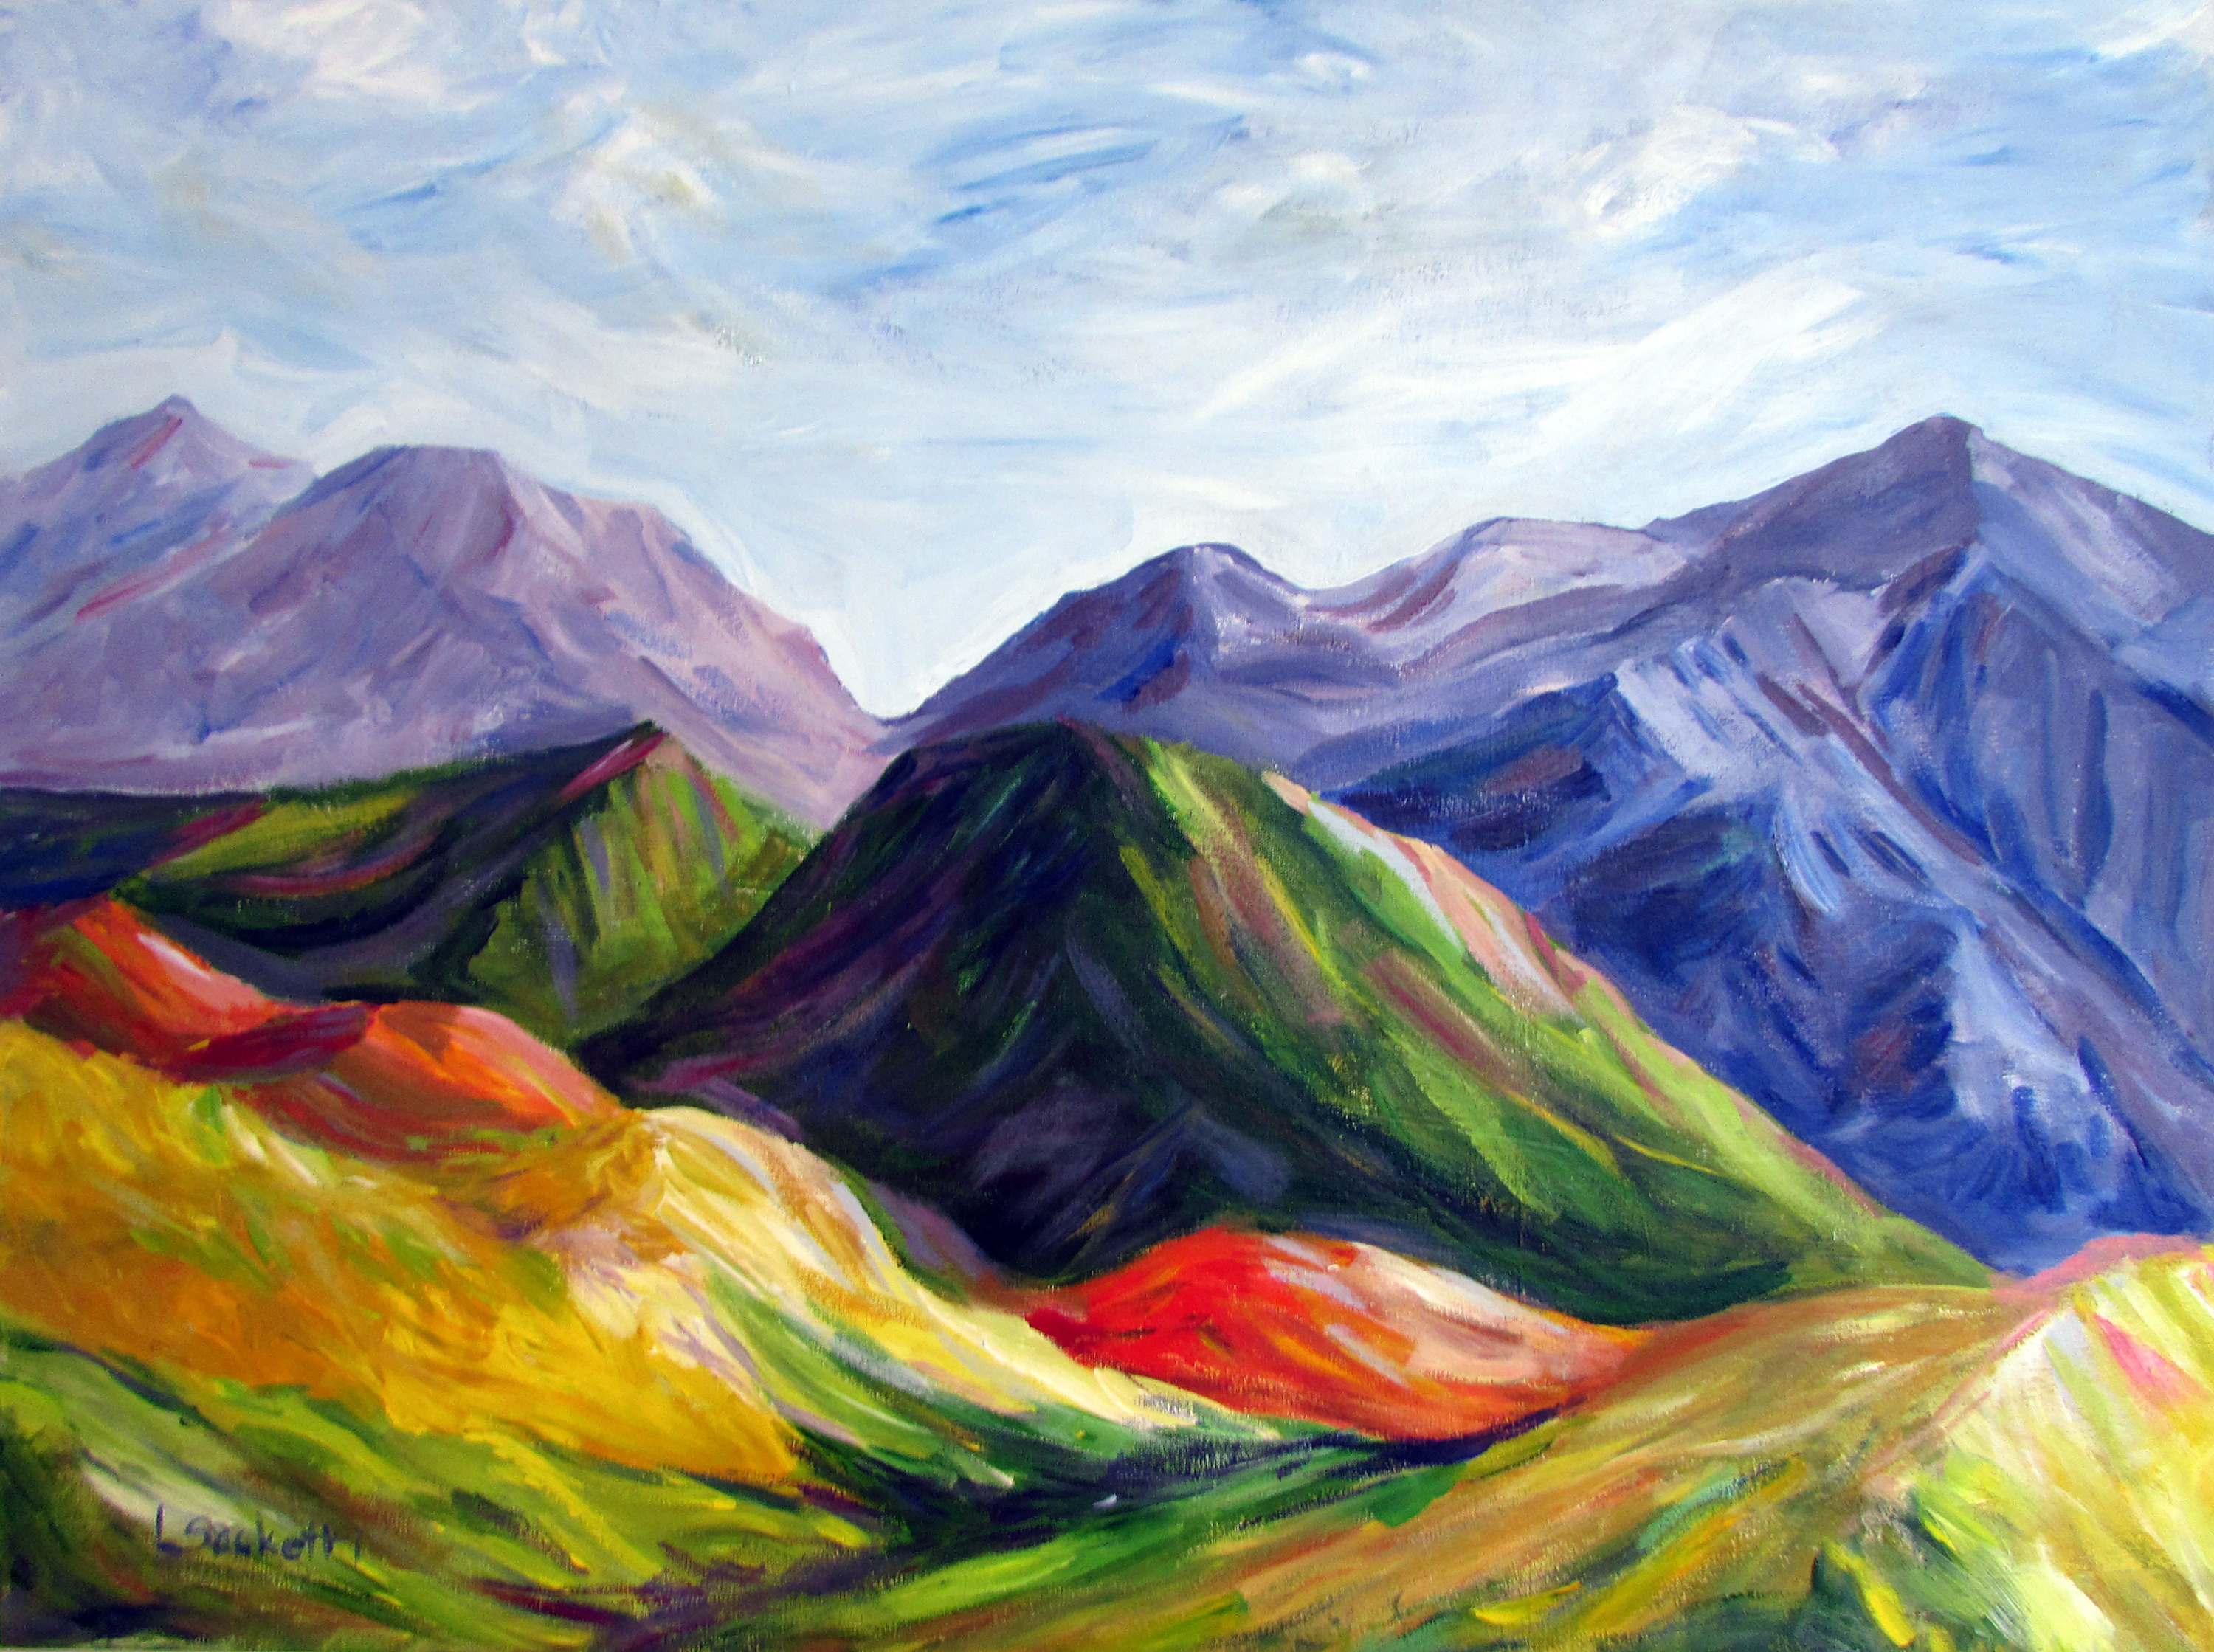 Mountains in my mind 15x20 hdfj0g